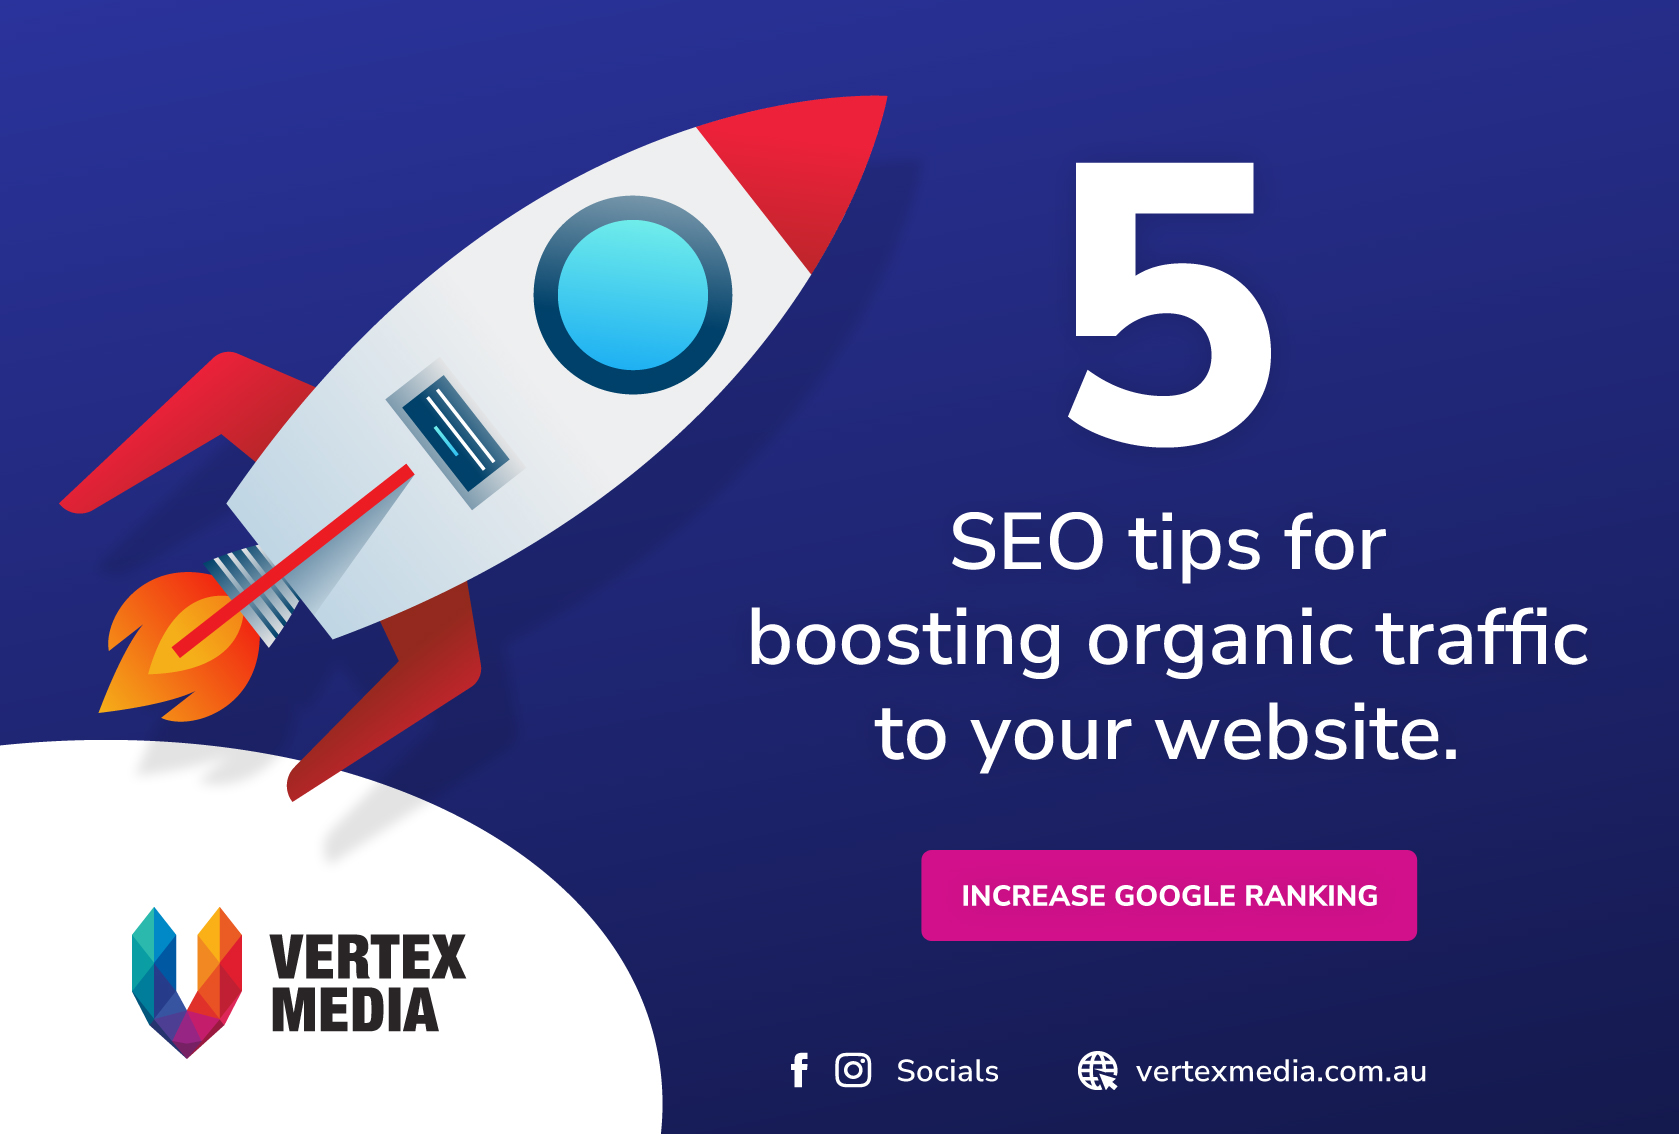 Boost your Google ranking and organic traffic to your website